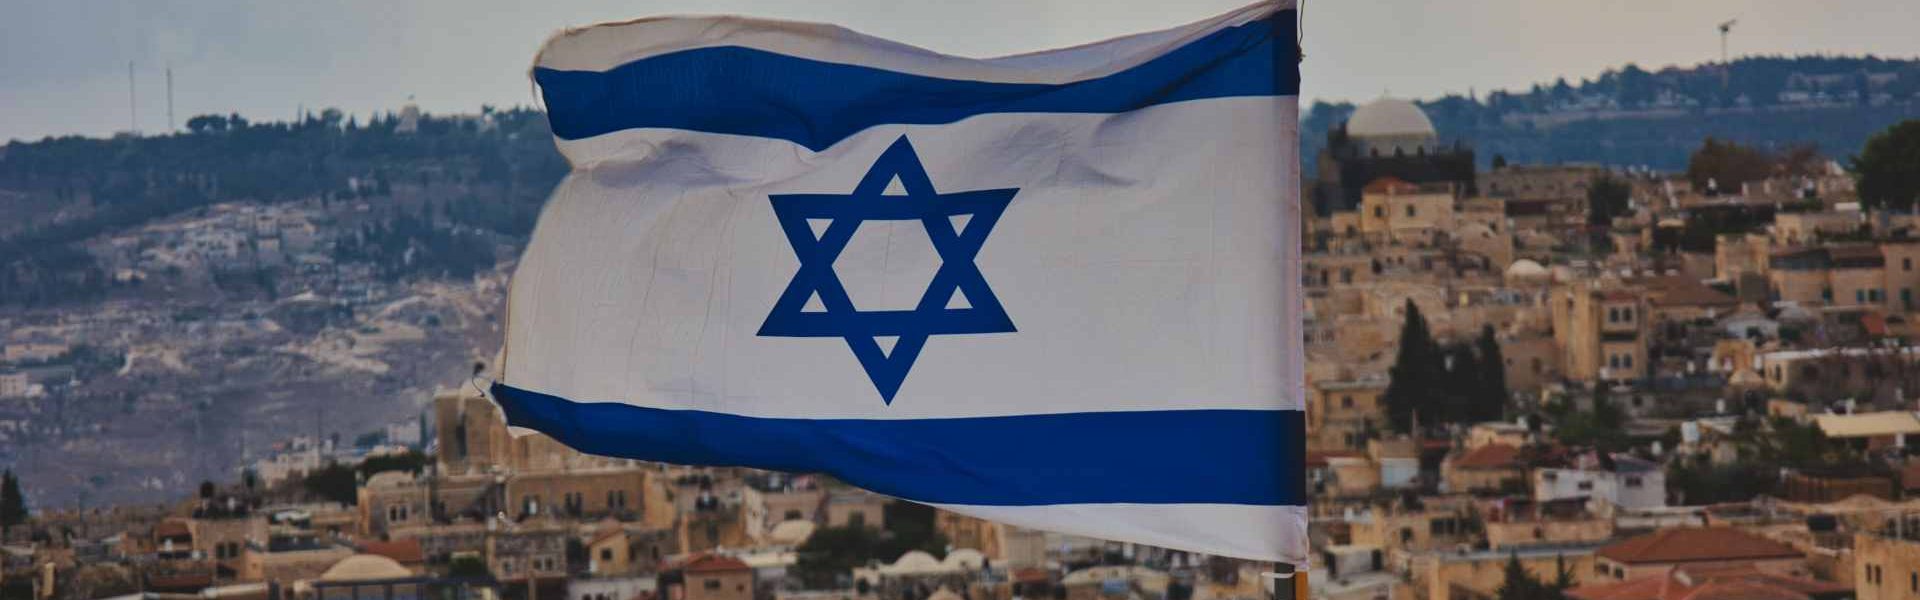 close-up-shot-of-the-flag-of-israel-with-the-old-c-2023-09-07-18-15-01-utc